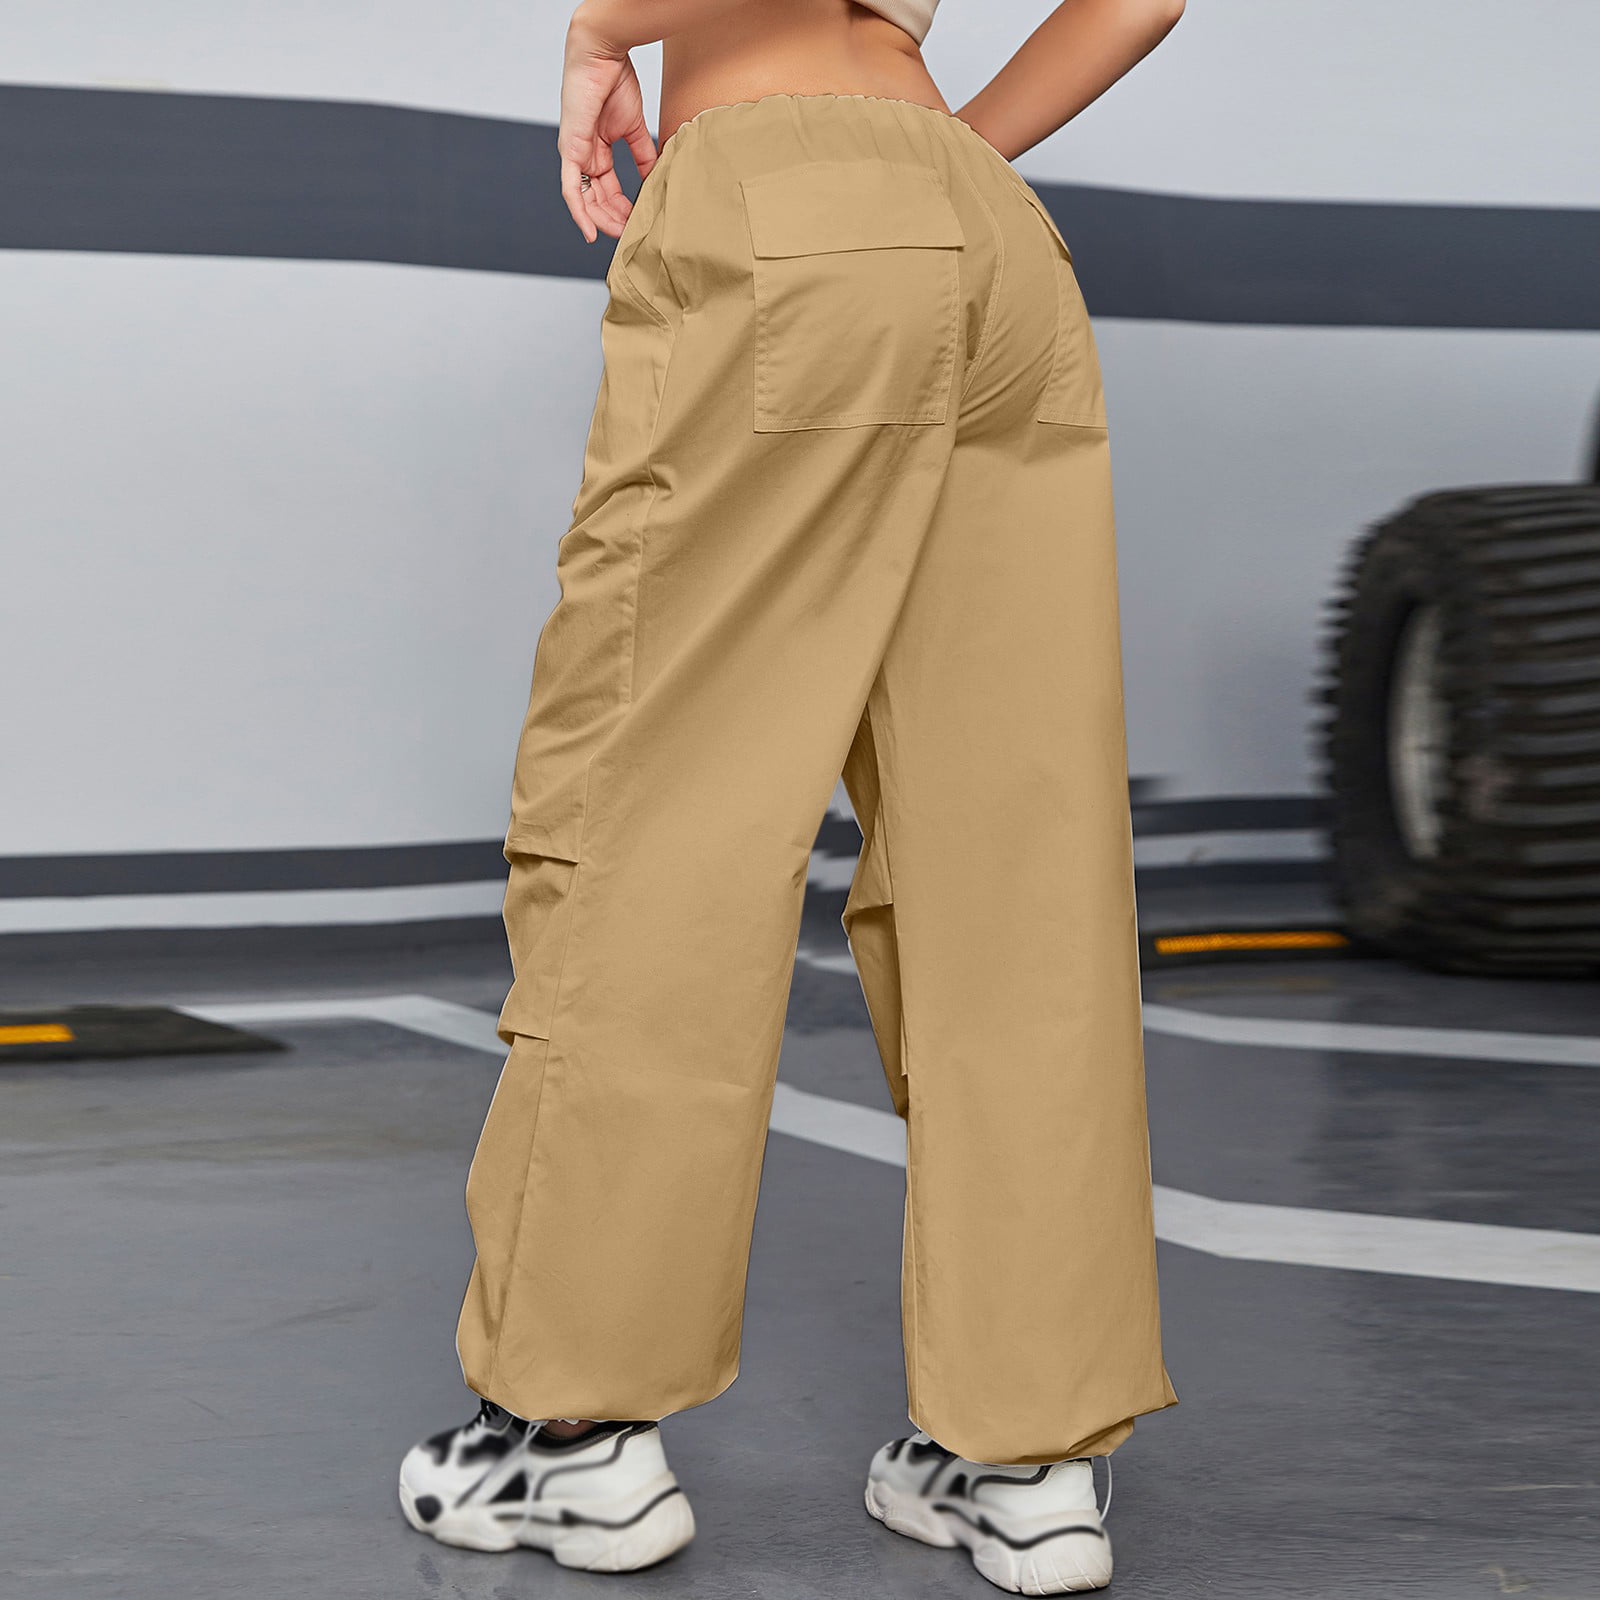 Amazon.com: DLFE Women Baggy Cargo Pants Low Waist Wide Leg Sweatpants  Casual Drawstring Loose Pocket Joggers Trousers (Small,A Khaki,Small) :  Clothing, Shoes & Jewelry